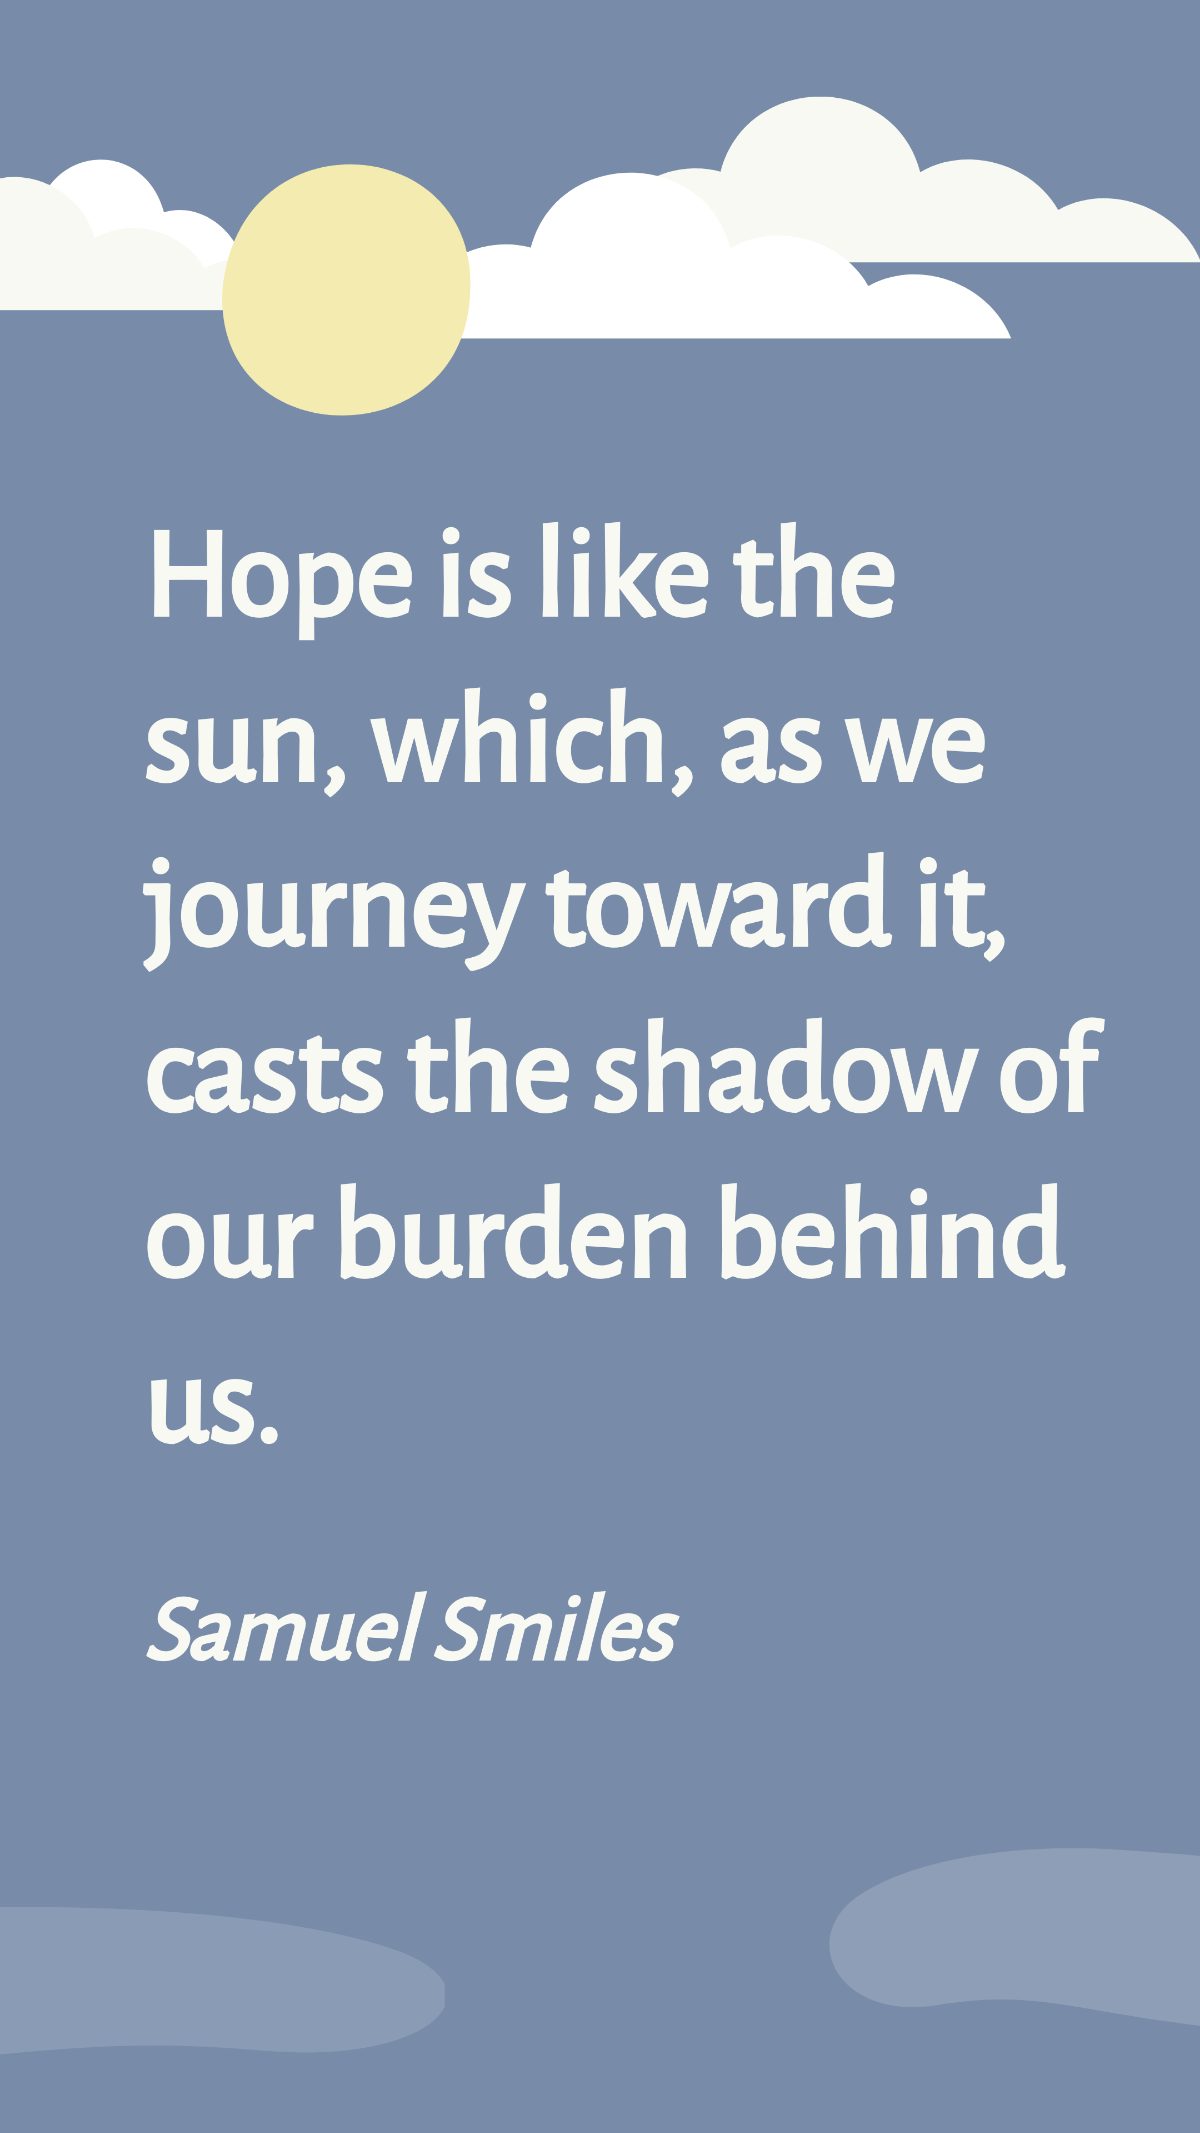 Samuel Smiles -Hope is like the sun, which, as we journey toward it, casts the shadow of our burden behind us.